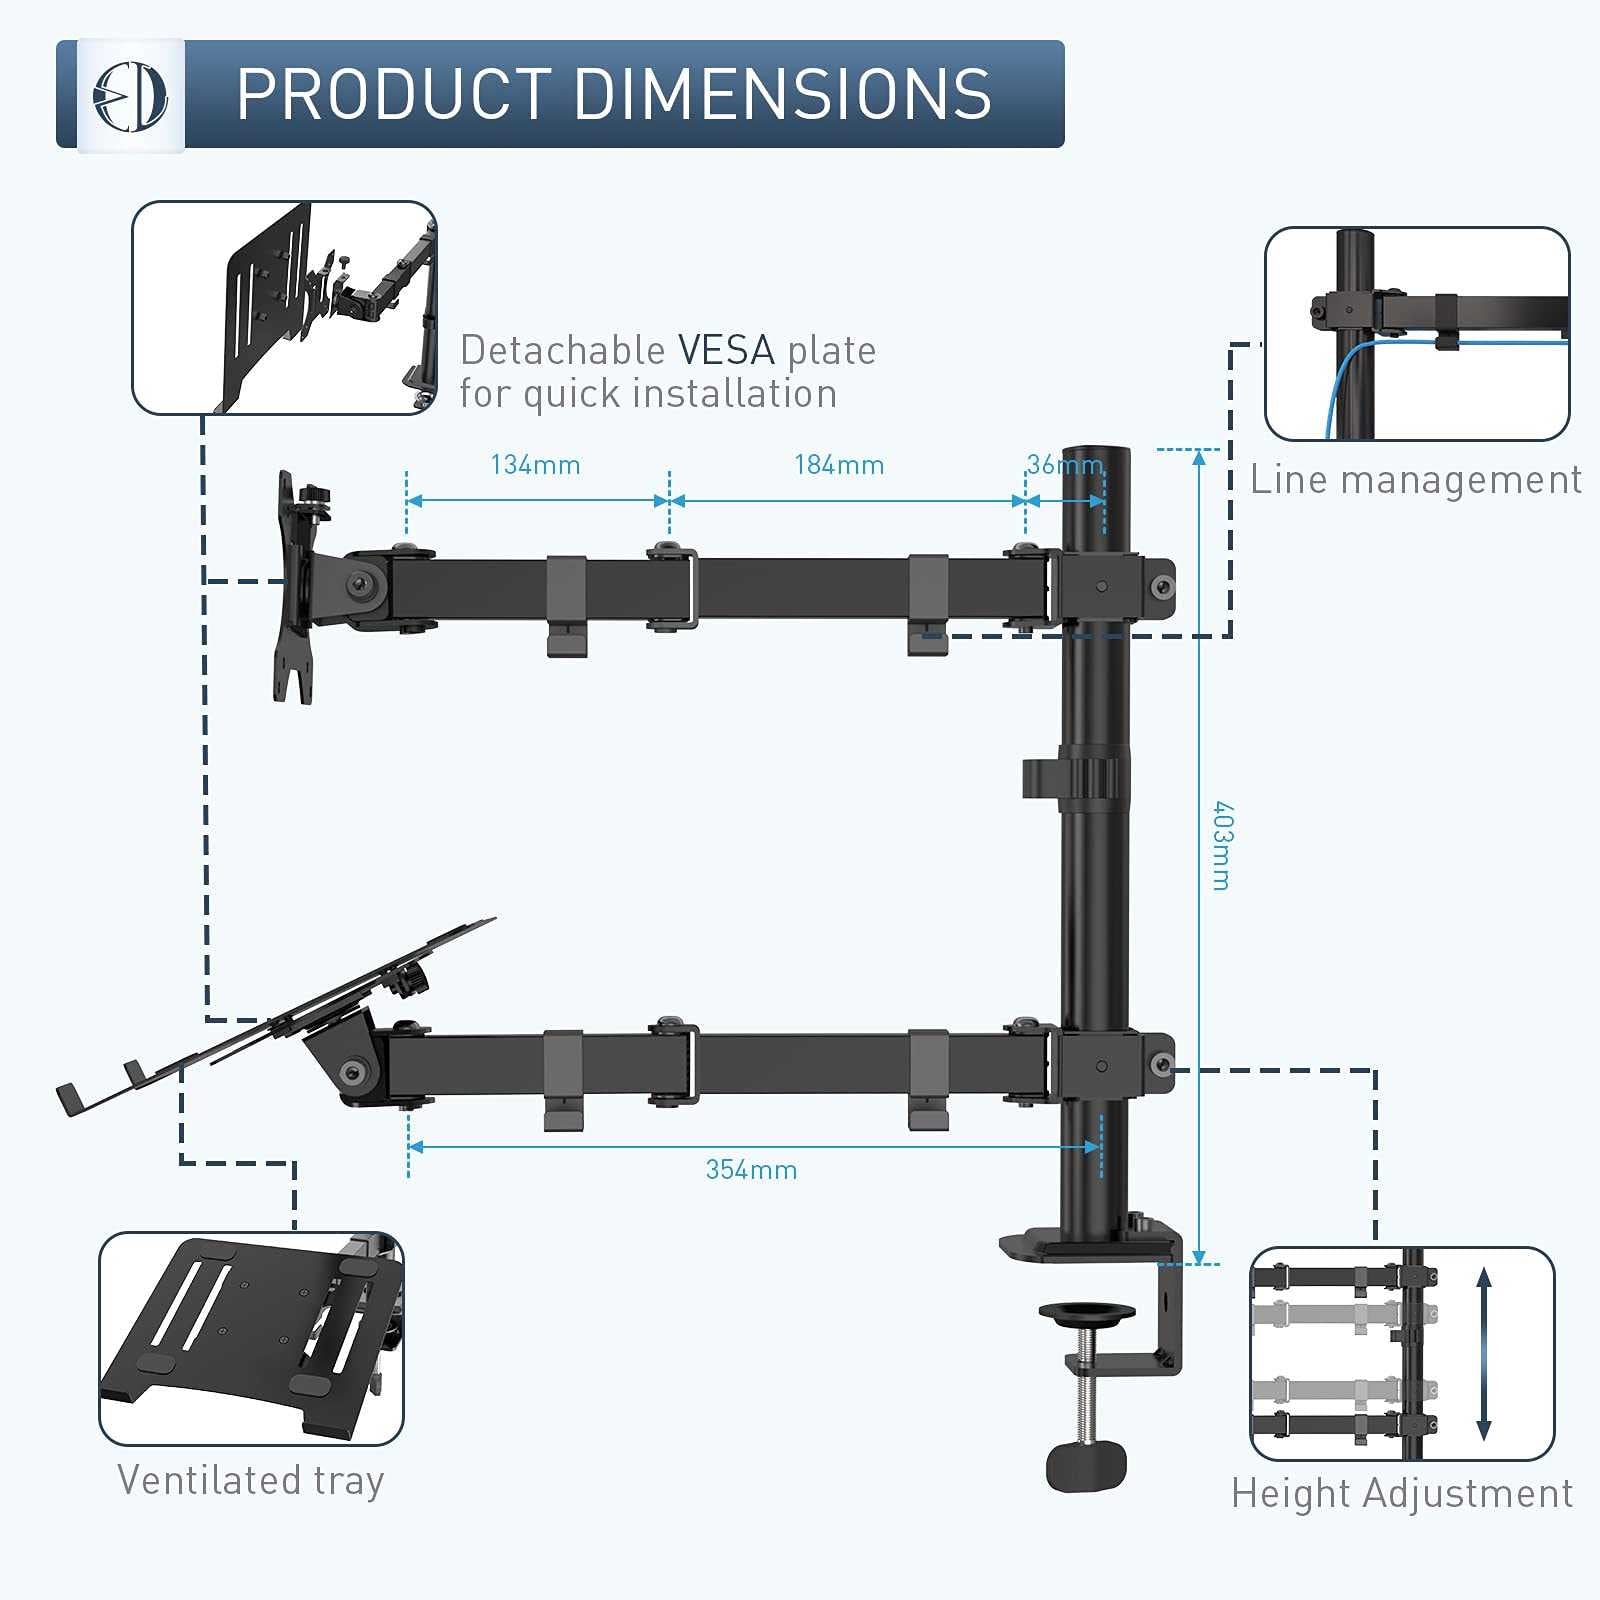 PUTORSEN®Monitor Mount with Laptop Arm for 13-27 Inch LCD LED Screen and 13-17" Notebook, 2 Mounting Options, VESA 75/100 mm, Black PUTORSEN